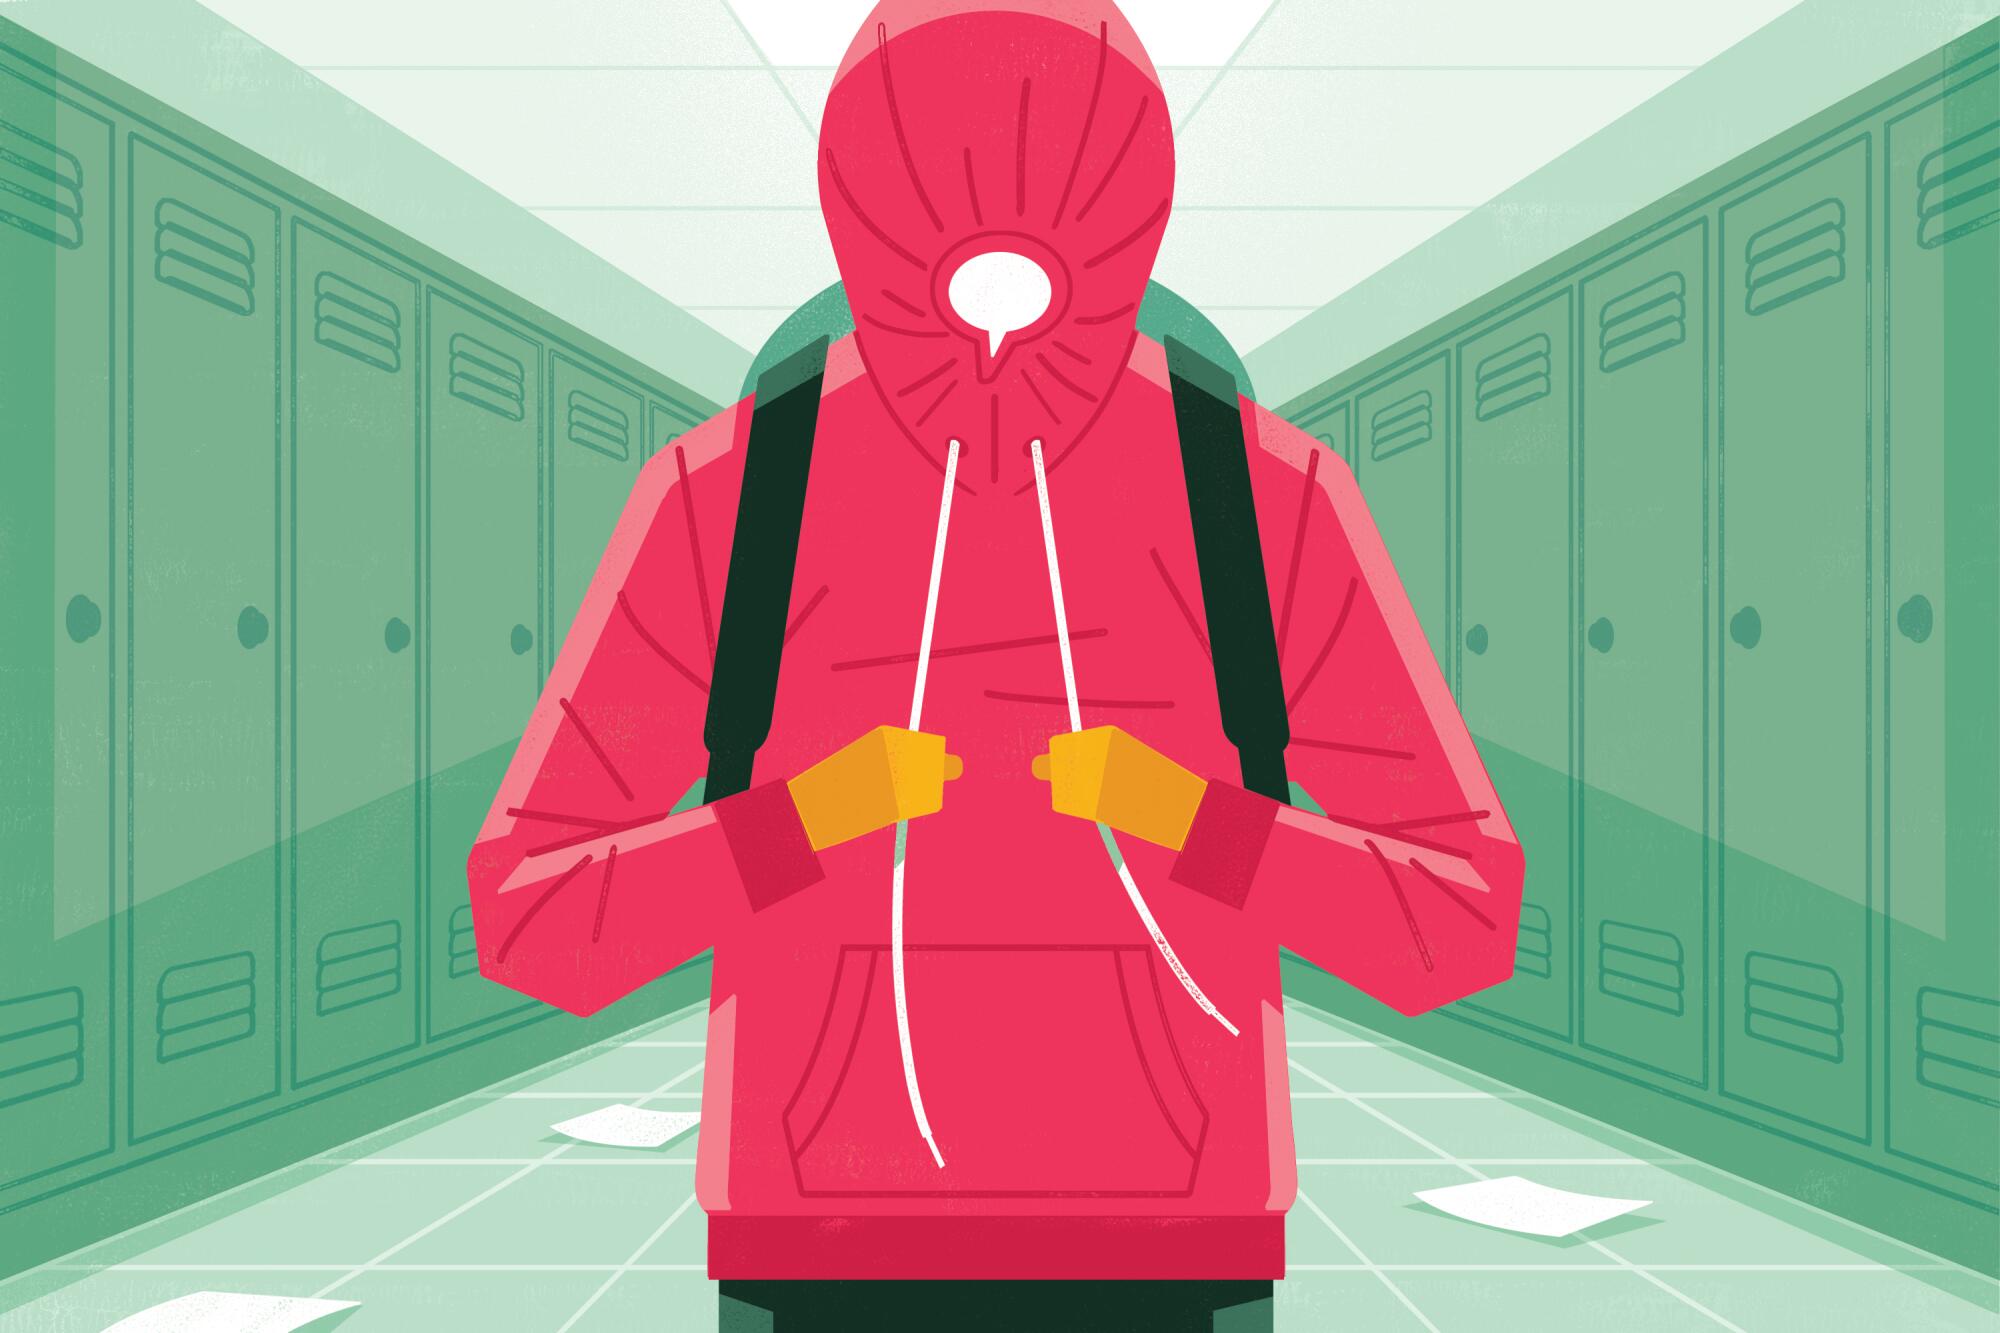 Illustration of a figure in a sweatshirt pulling the hood closed to the shape of a talk balloon.